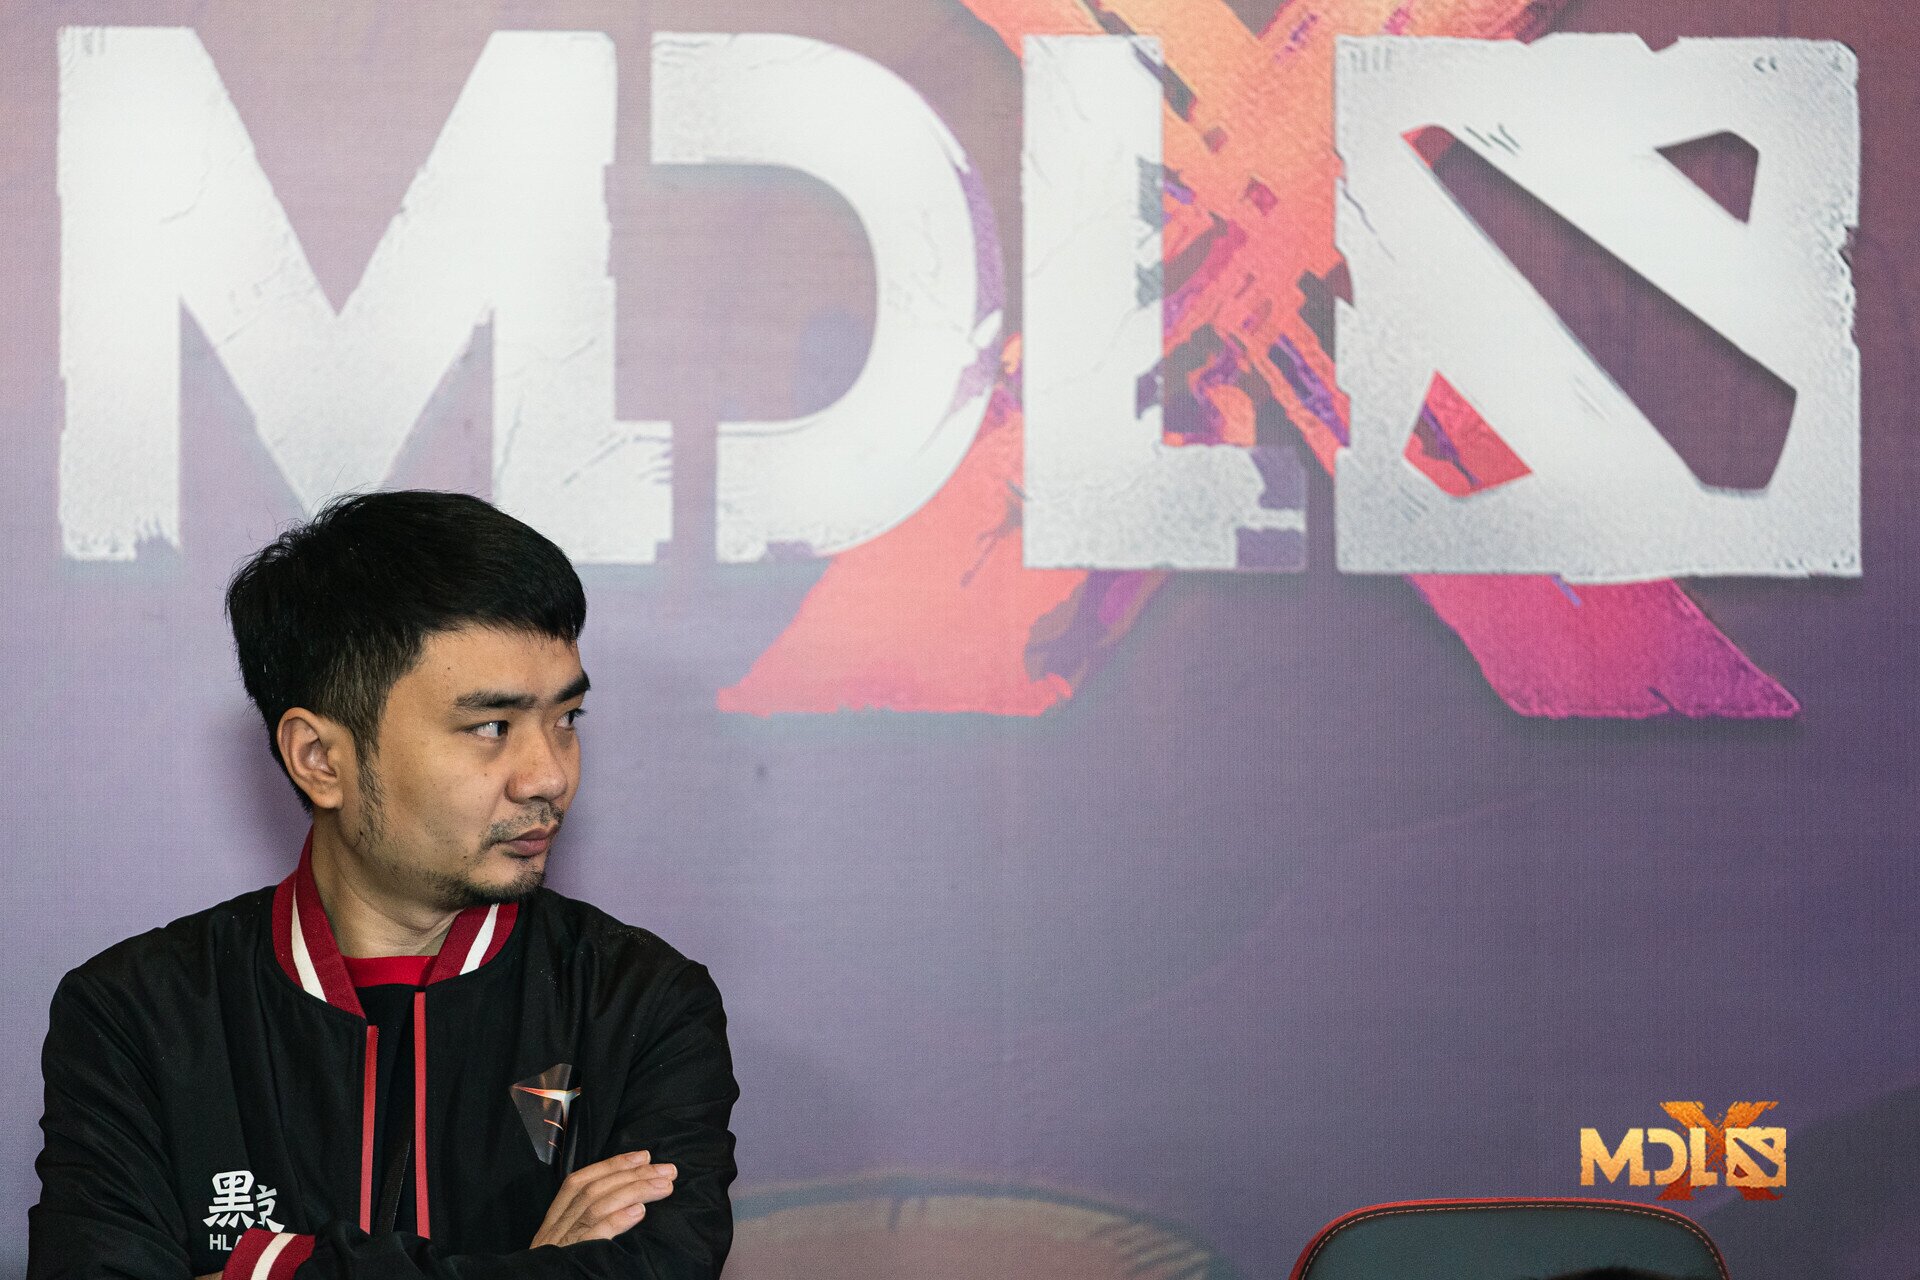 EHOME coach xiao8 (pictured) voiced his dissatisfaction with his team’s performance at MDL Chengdu in a live stream last week (Photo via Mars Media)